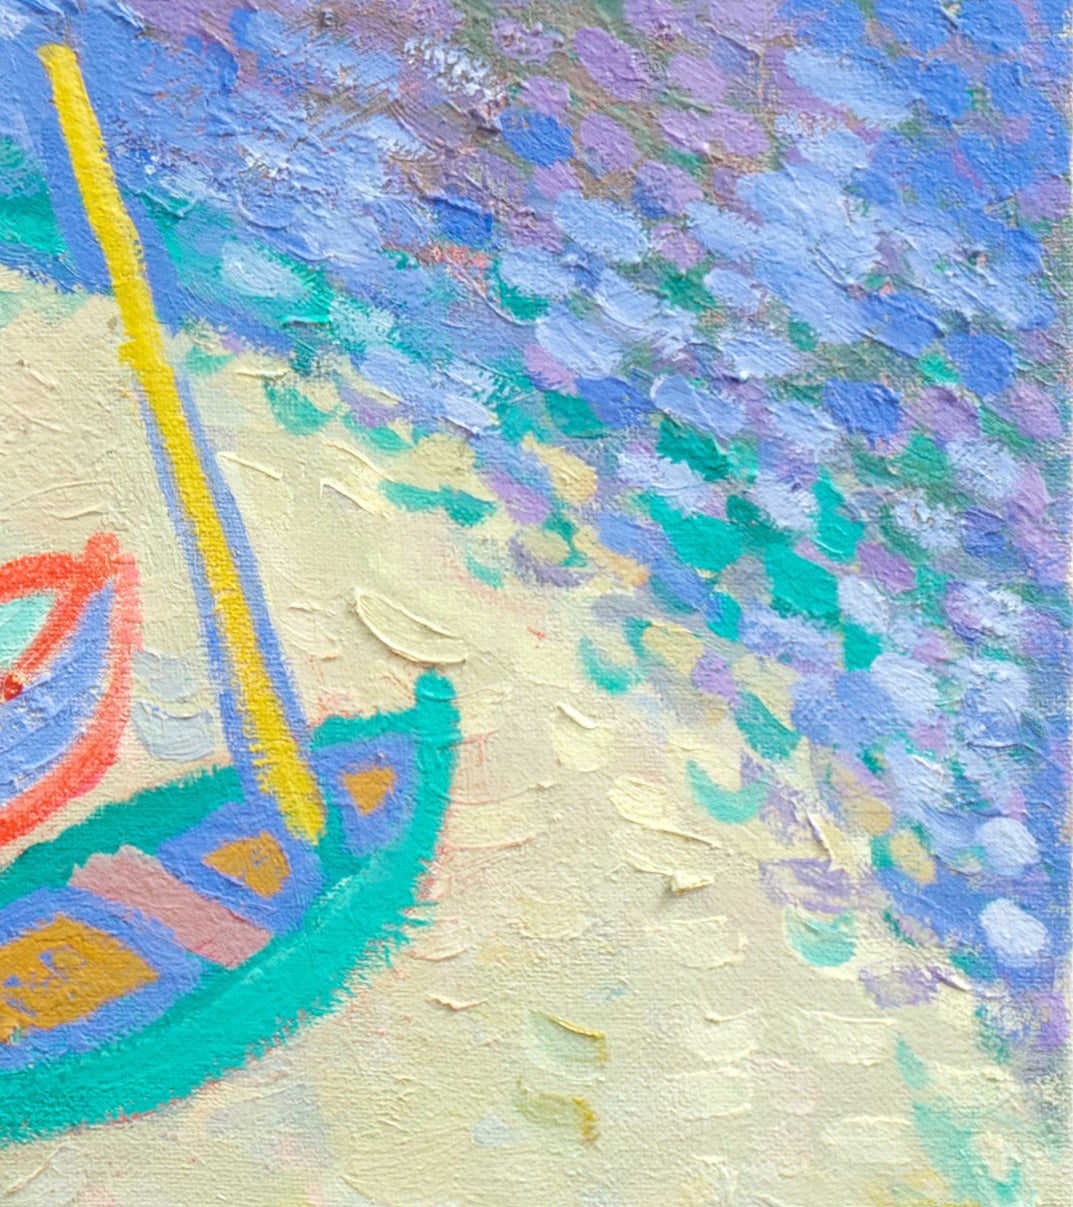 Boats on the Beach - Expressionist Painting by Johannes Carstensen